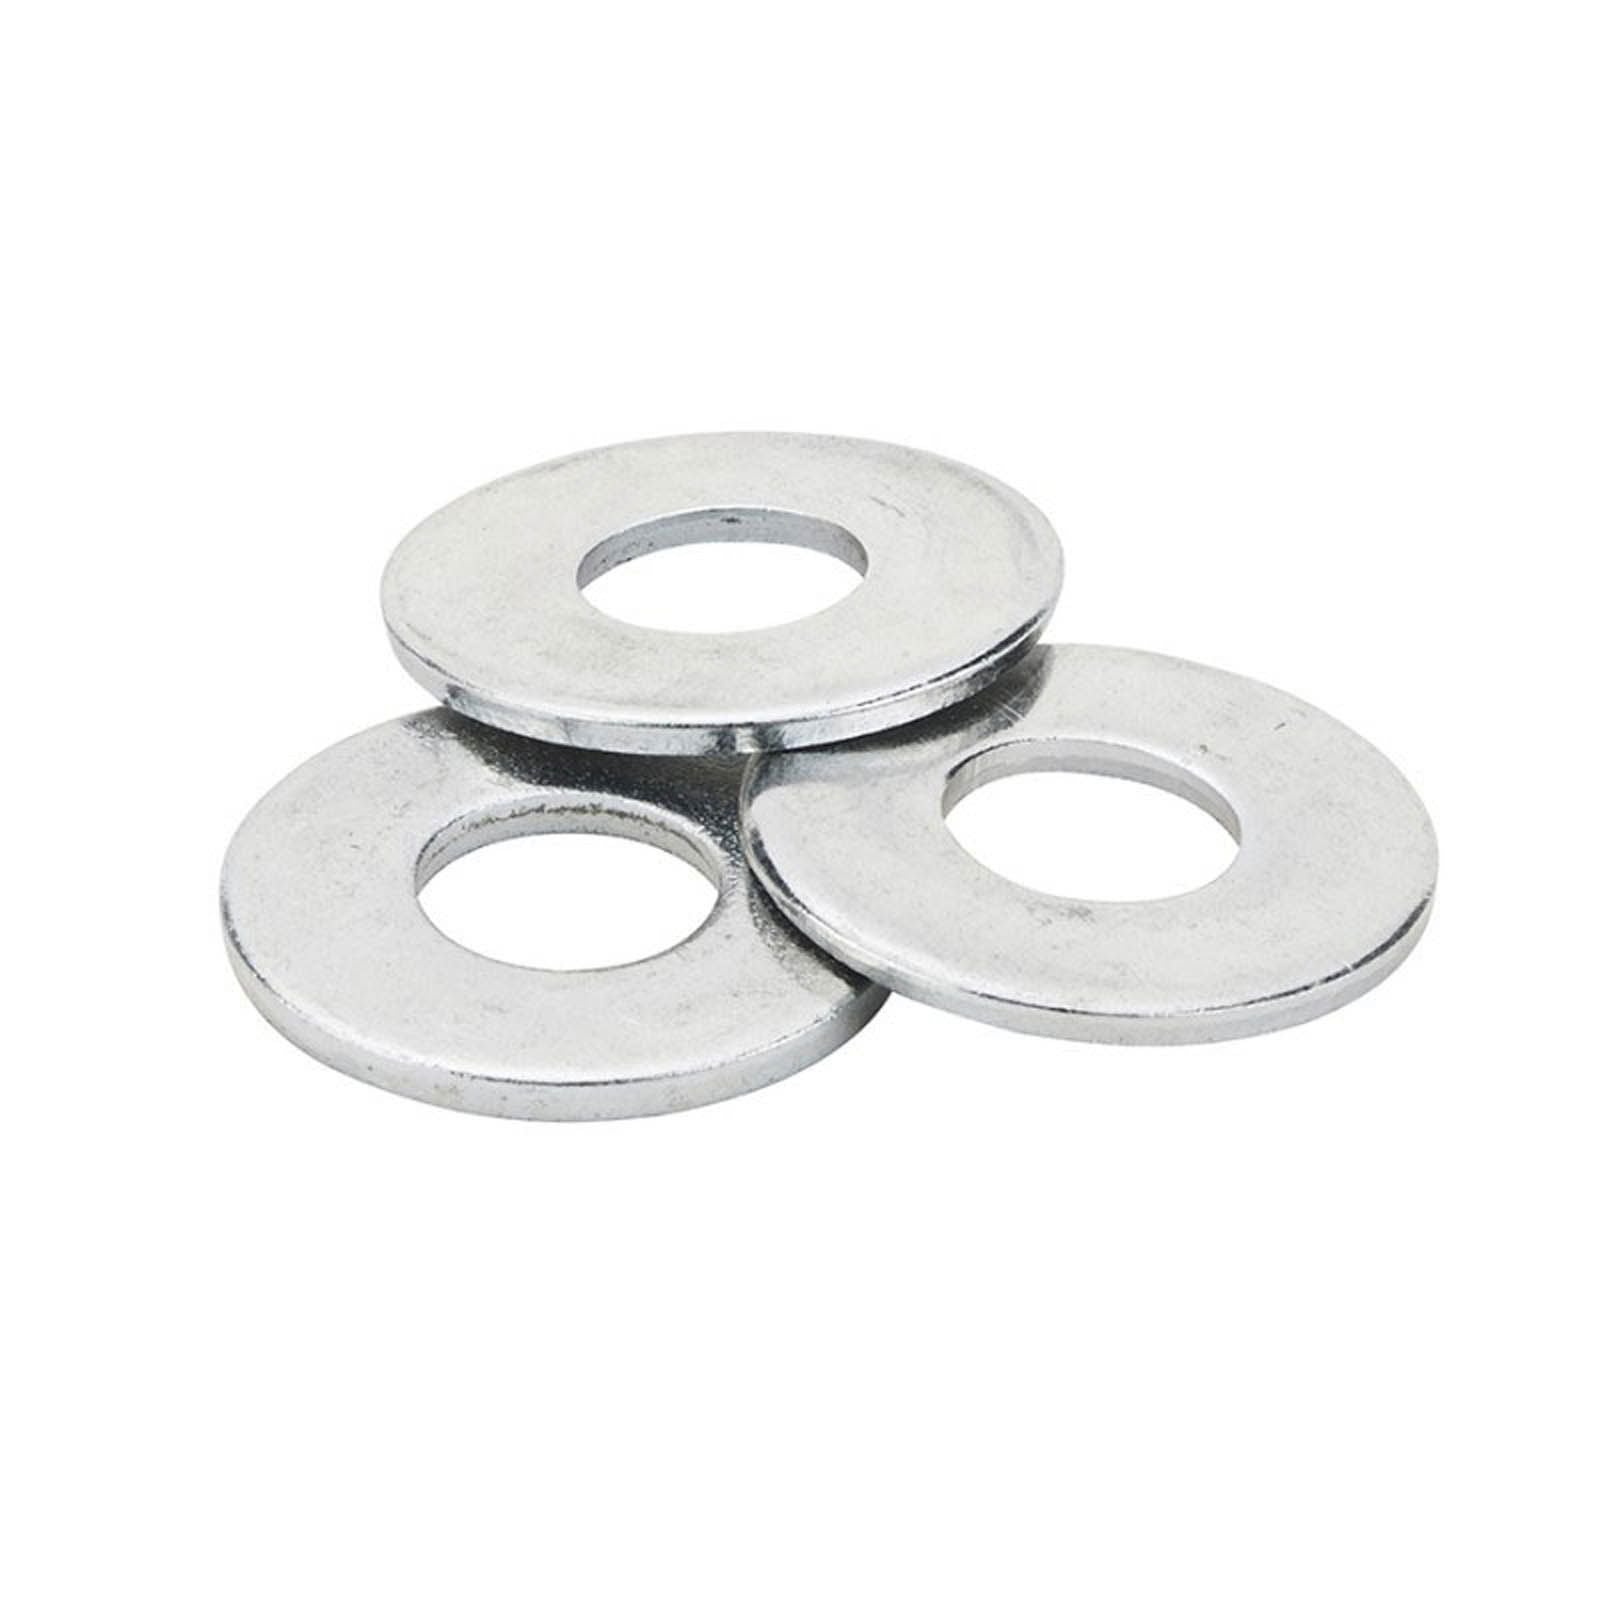 New WHITES Washer Flat Zinc Plated - 12mm (50 Pack) #HWW12